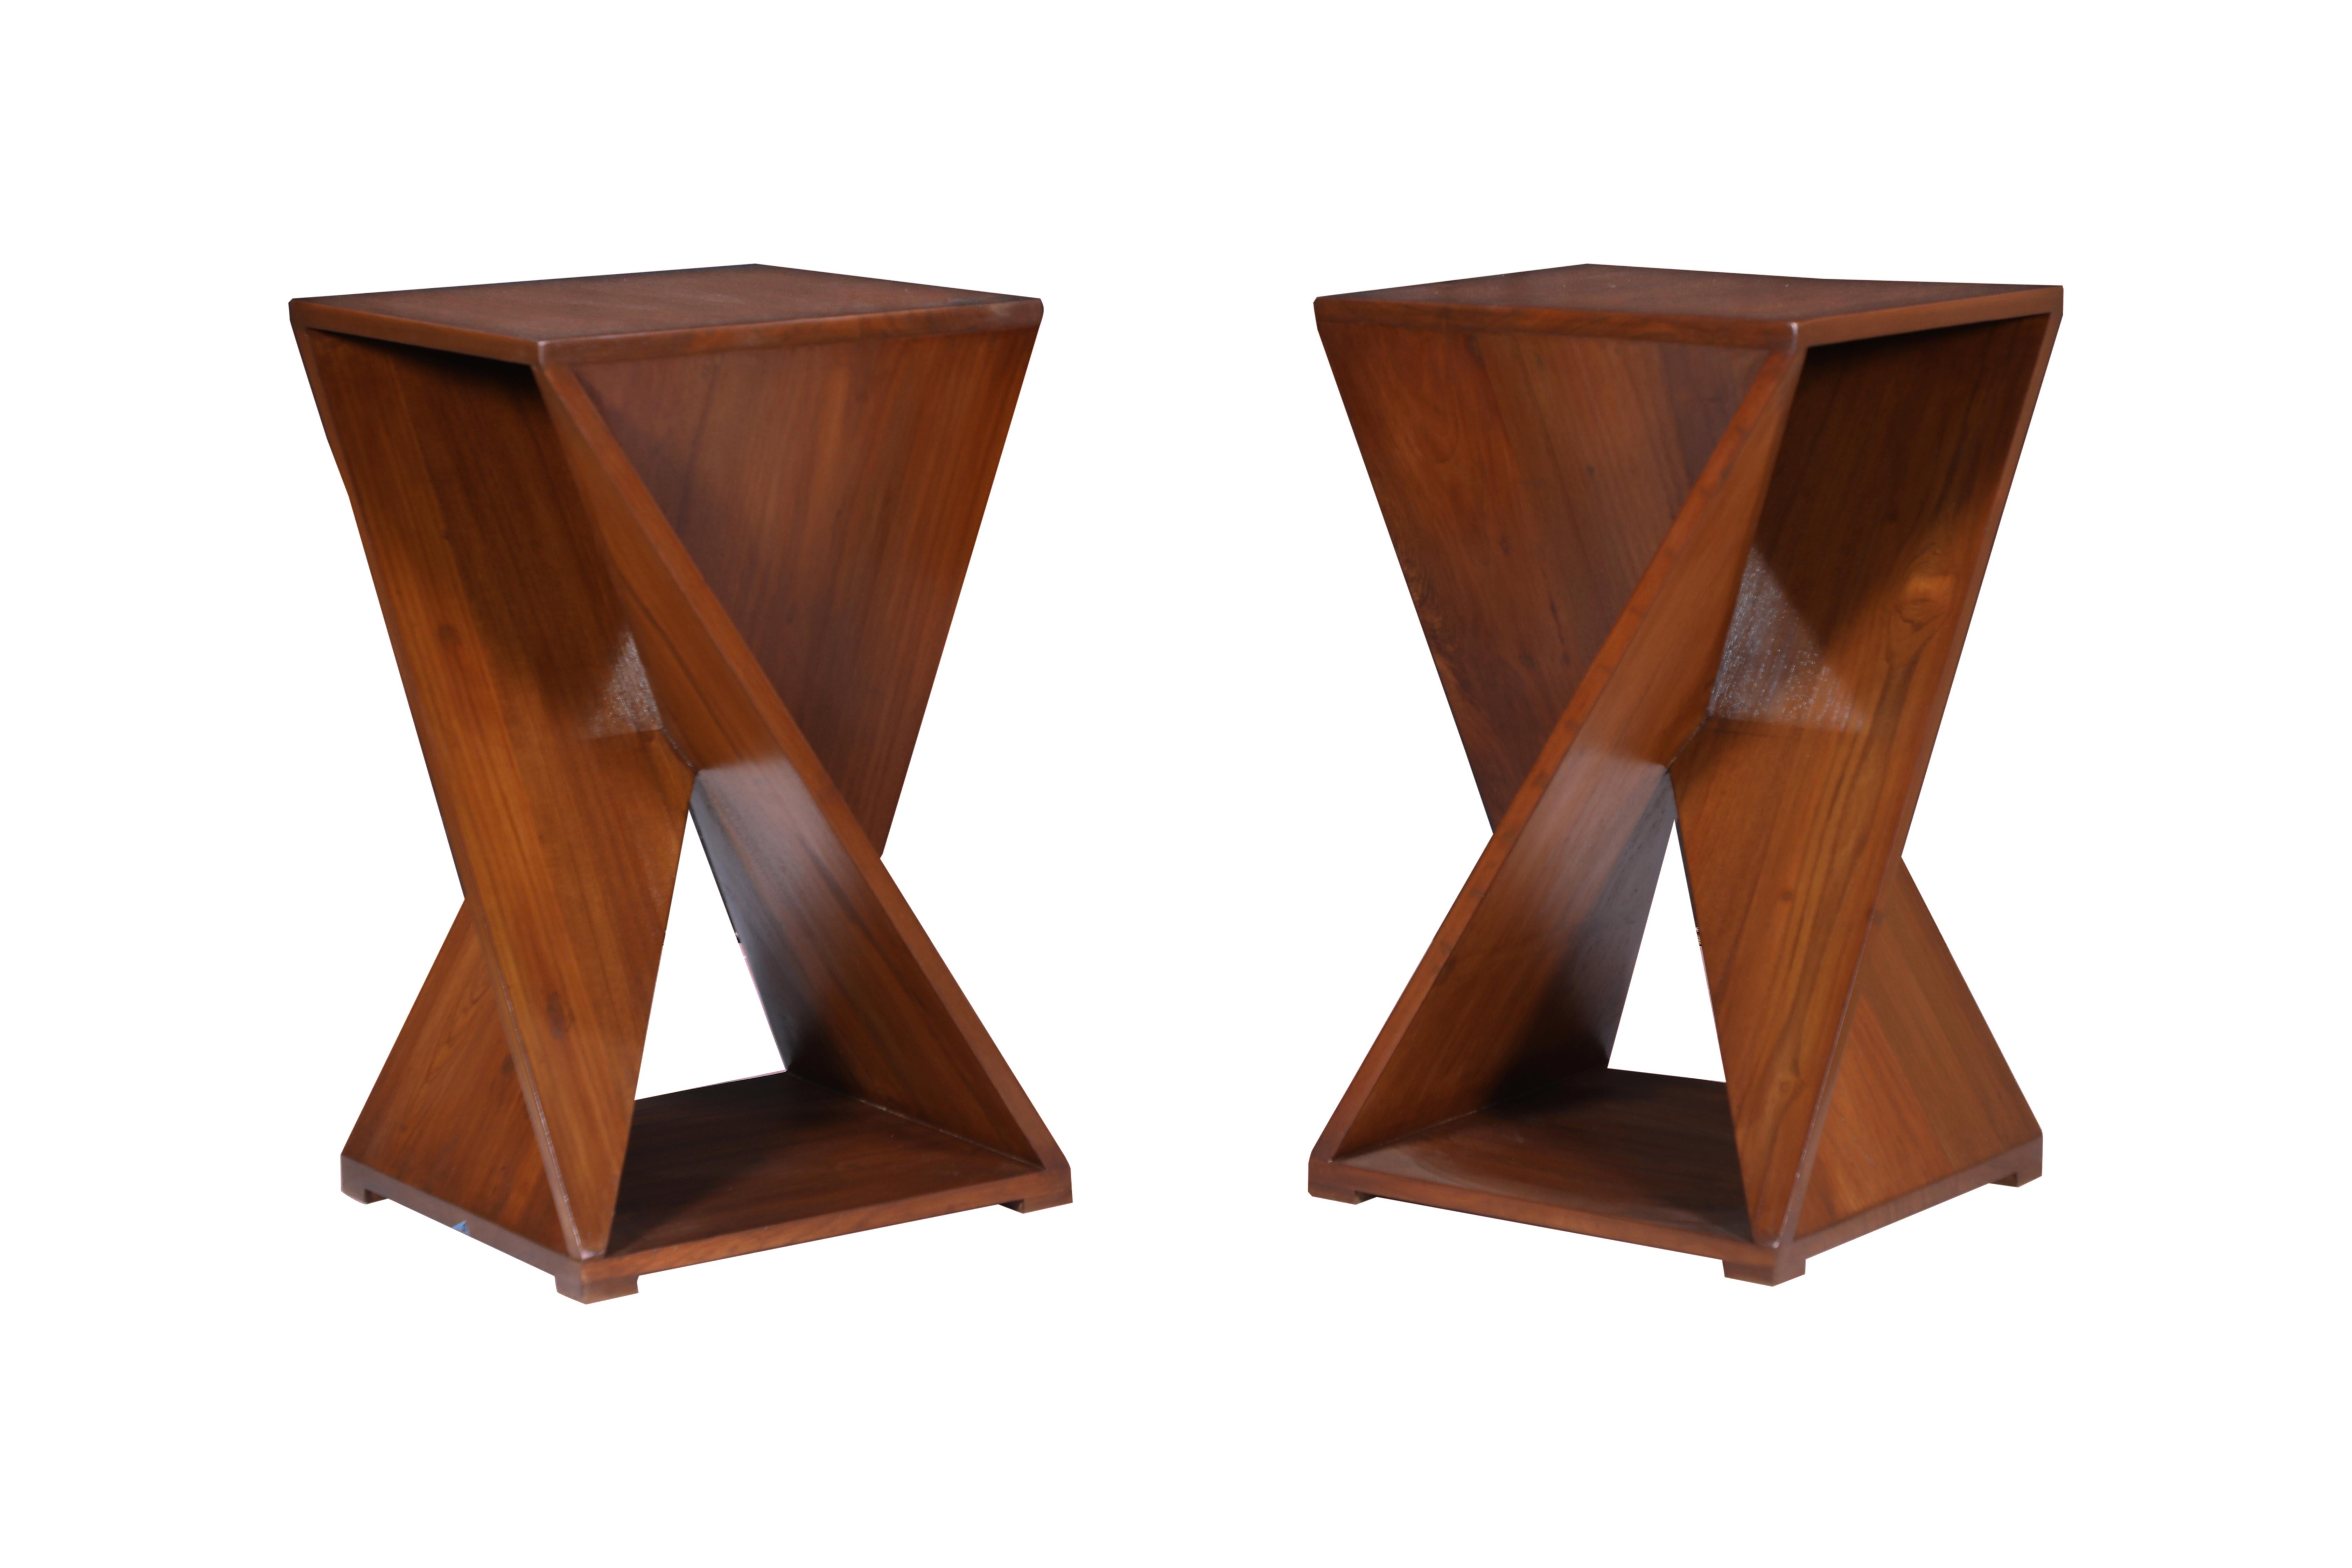 A fabulous pair of intricately designed side or end tables with multiple angles taking on an architectural aesthetic. Made in solid teak. Designed by Deborah Lockhart Phillips. Modern.